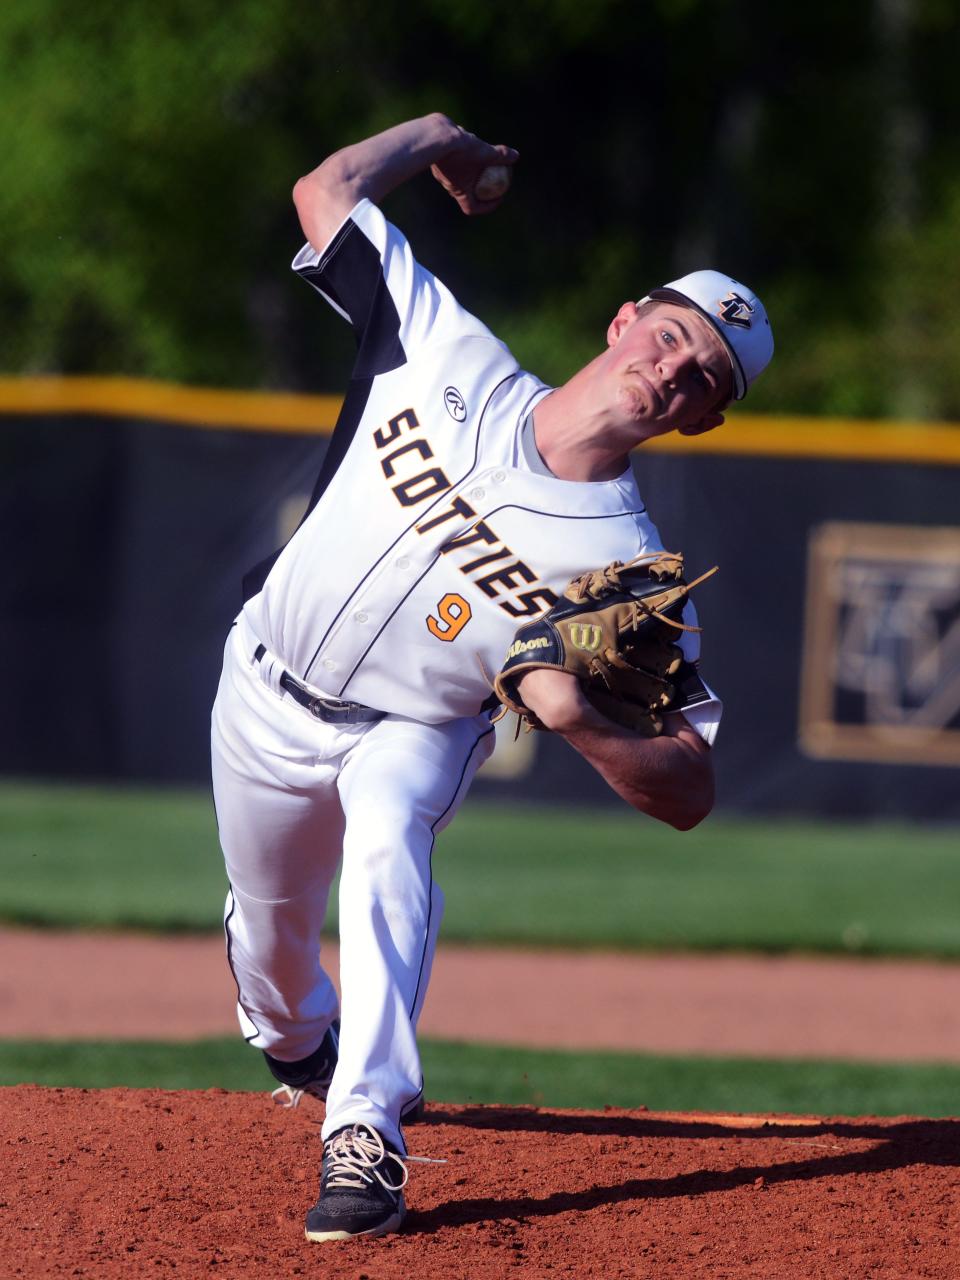 Tri-Valley's Landon Harney fires a pitch during a 7-2 loss to visiting Sheridan on May 12, 2022, at Kenny Wolford Park in Dresden. Harney returns to lead the Scotties to another run at the Muskingum Valley League-Big School Division title in 2023.